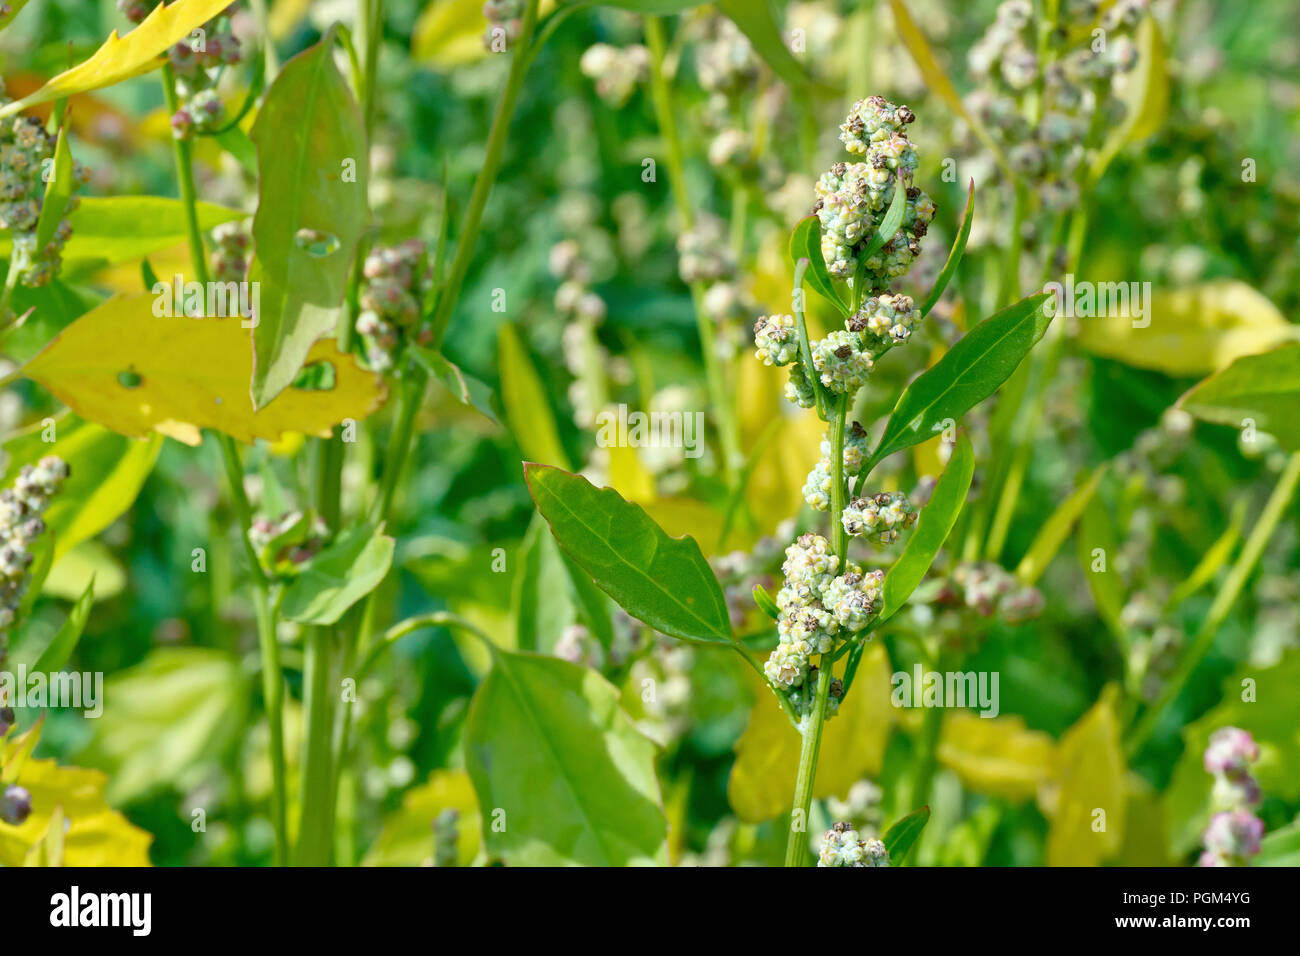 Fat-hen (chenopodium album), close up of a flowering stem showing leaves. Stock Photo